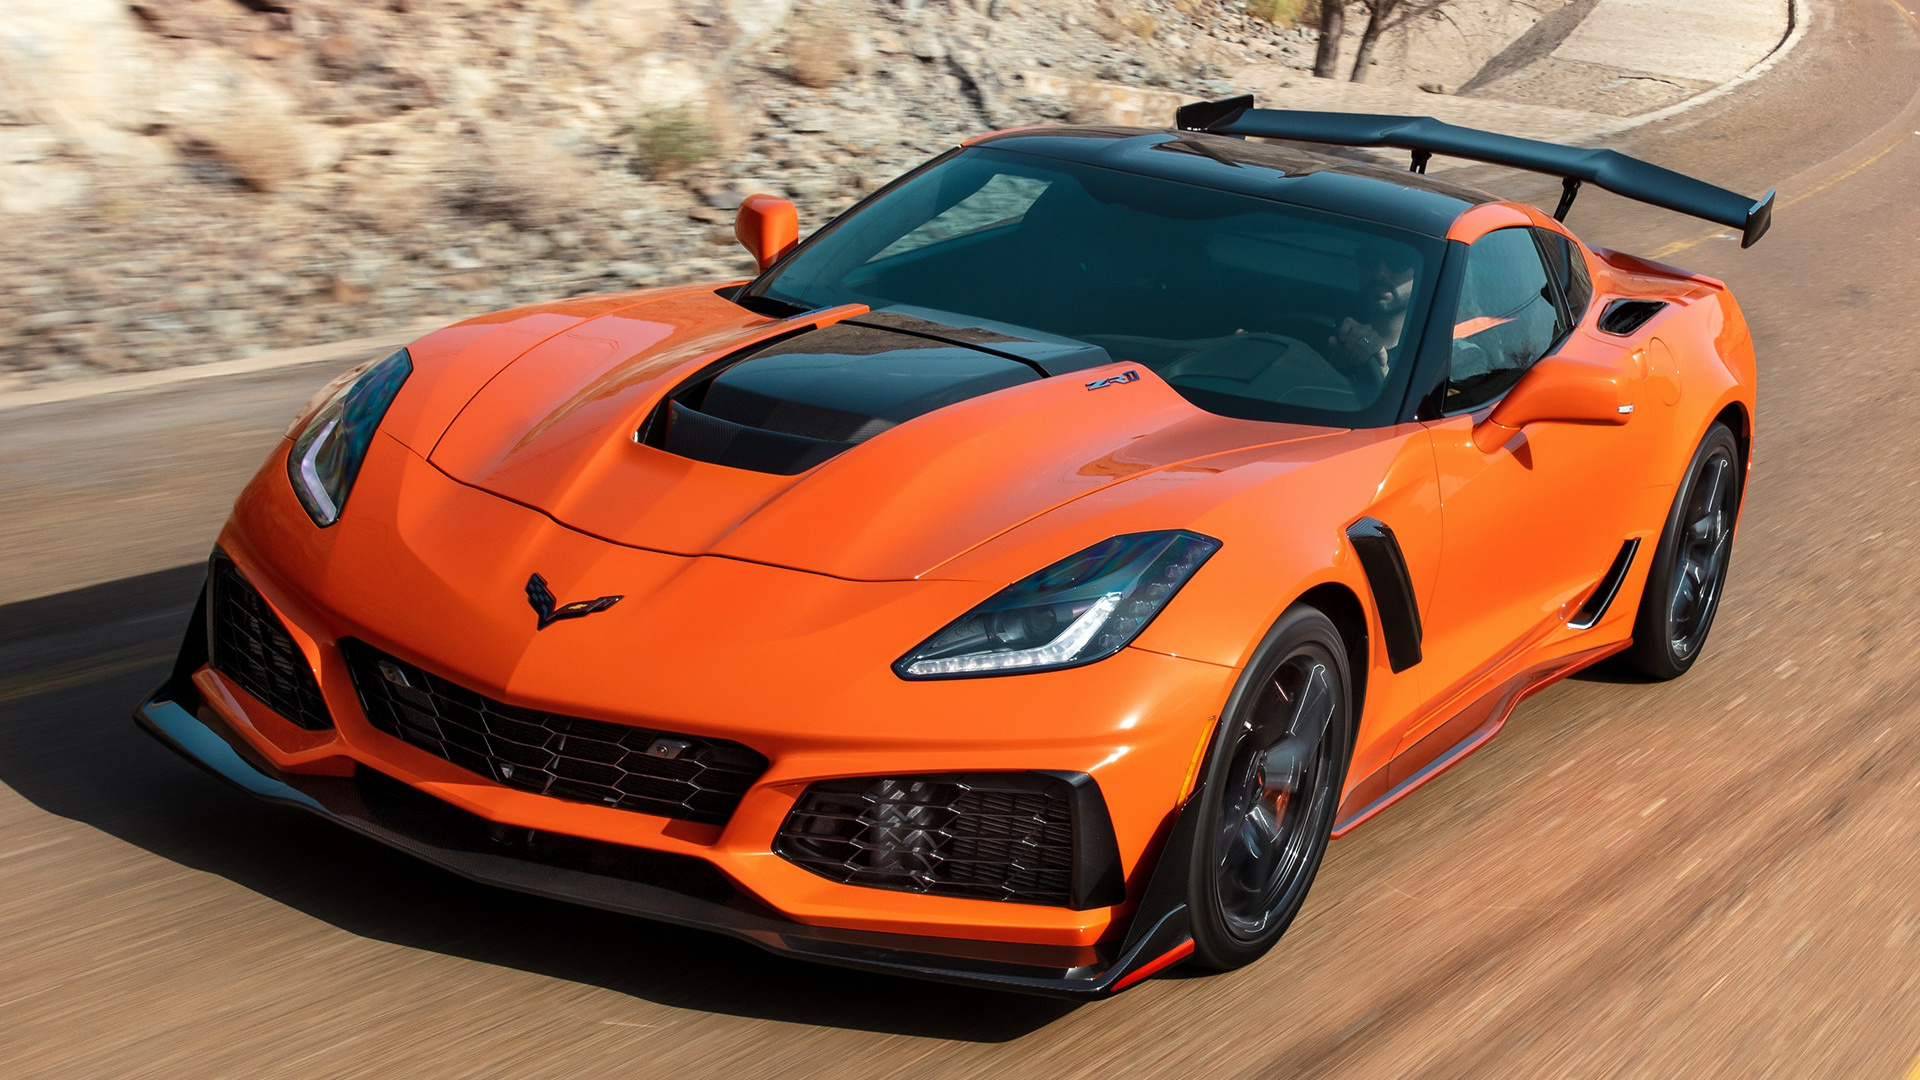 2018 Chevrolet Corvette ZR1 - Wallpapers and HD Images | Car Pixel